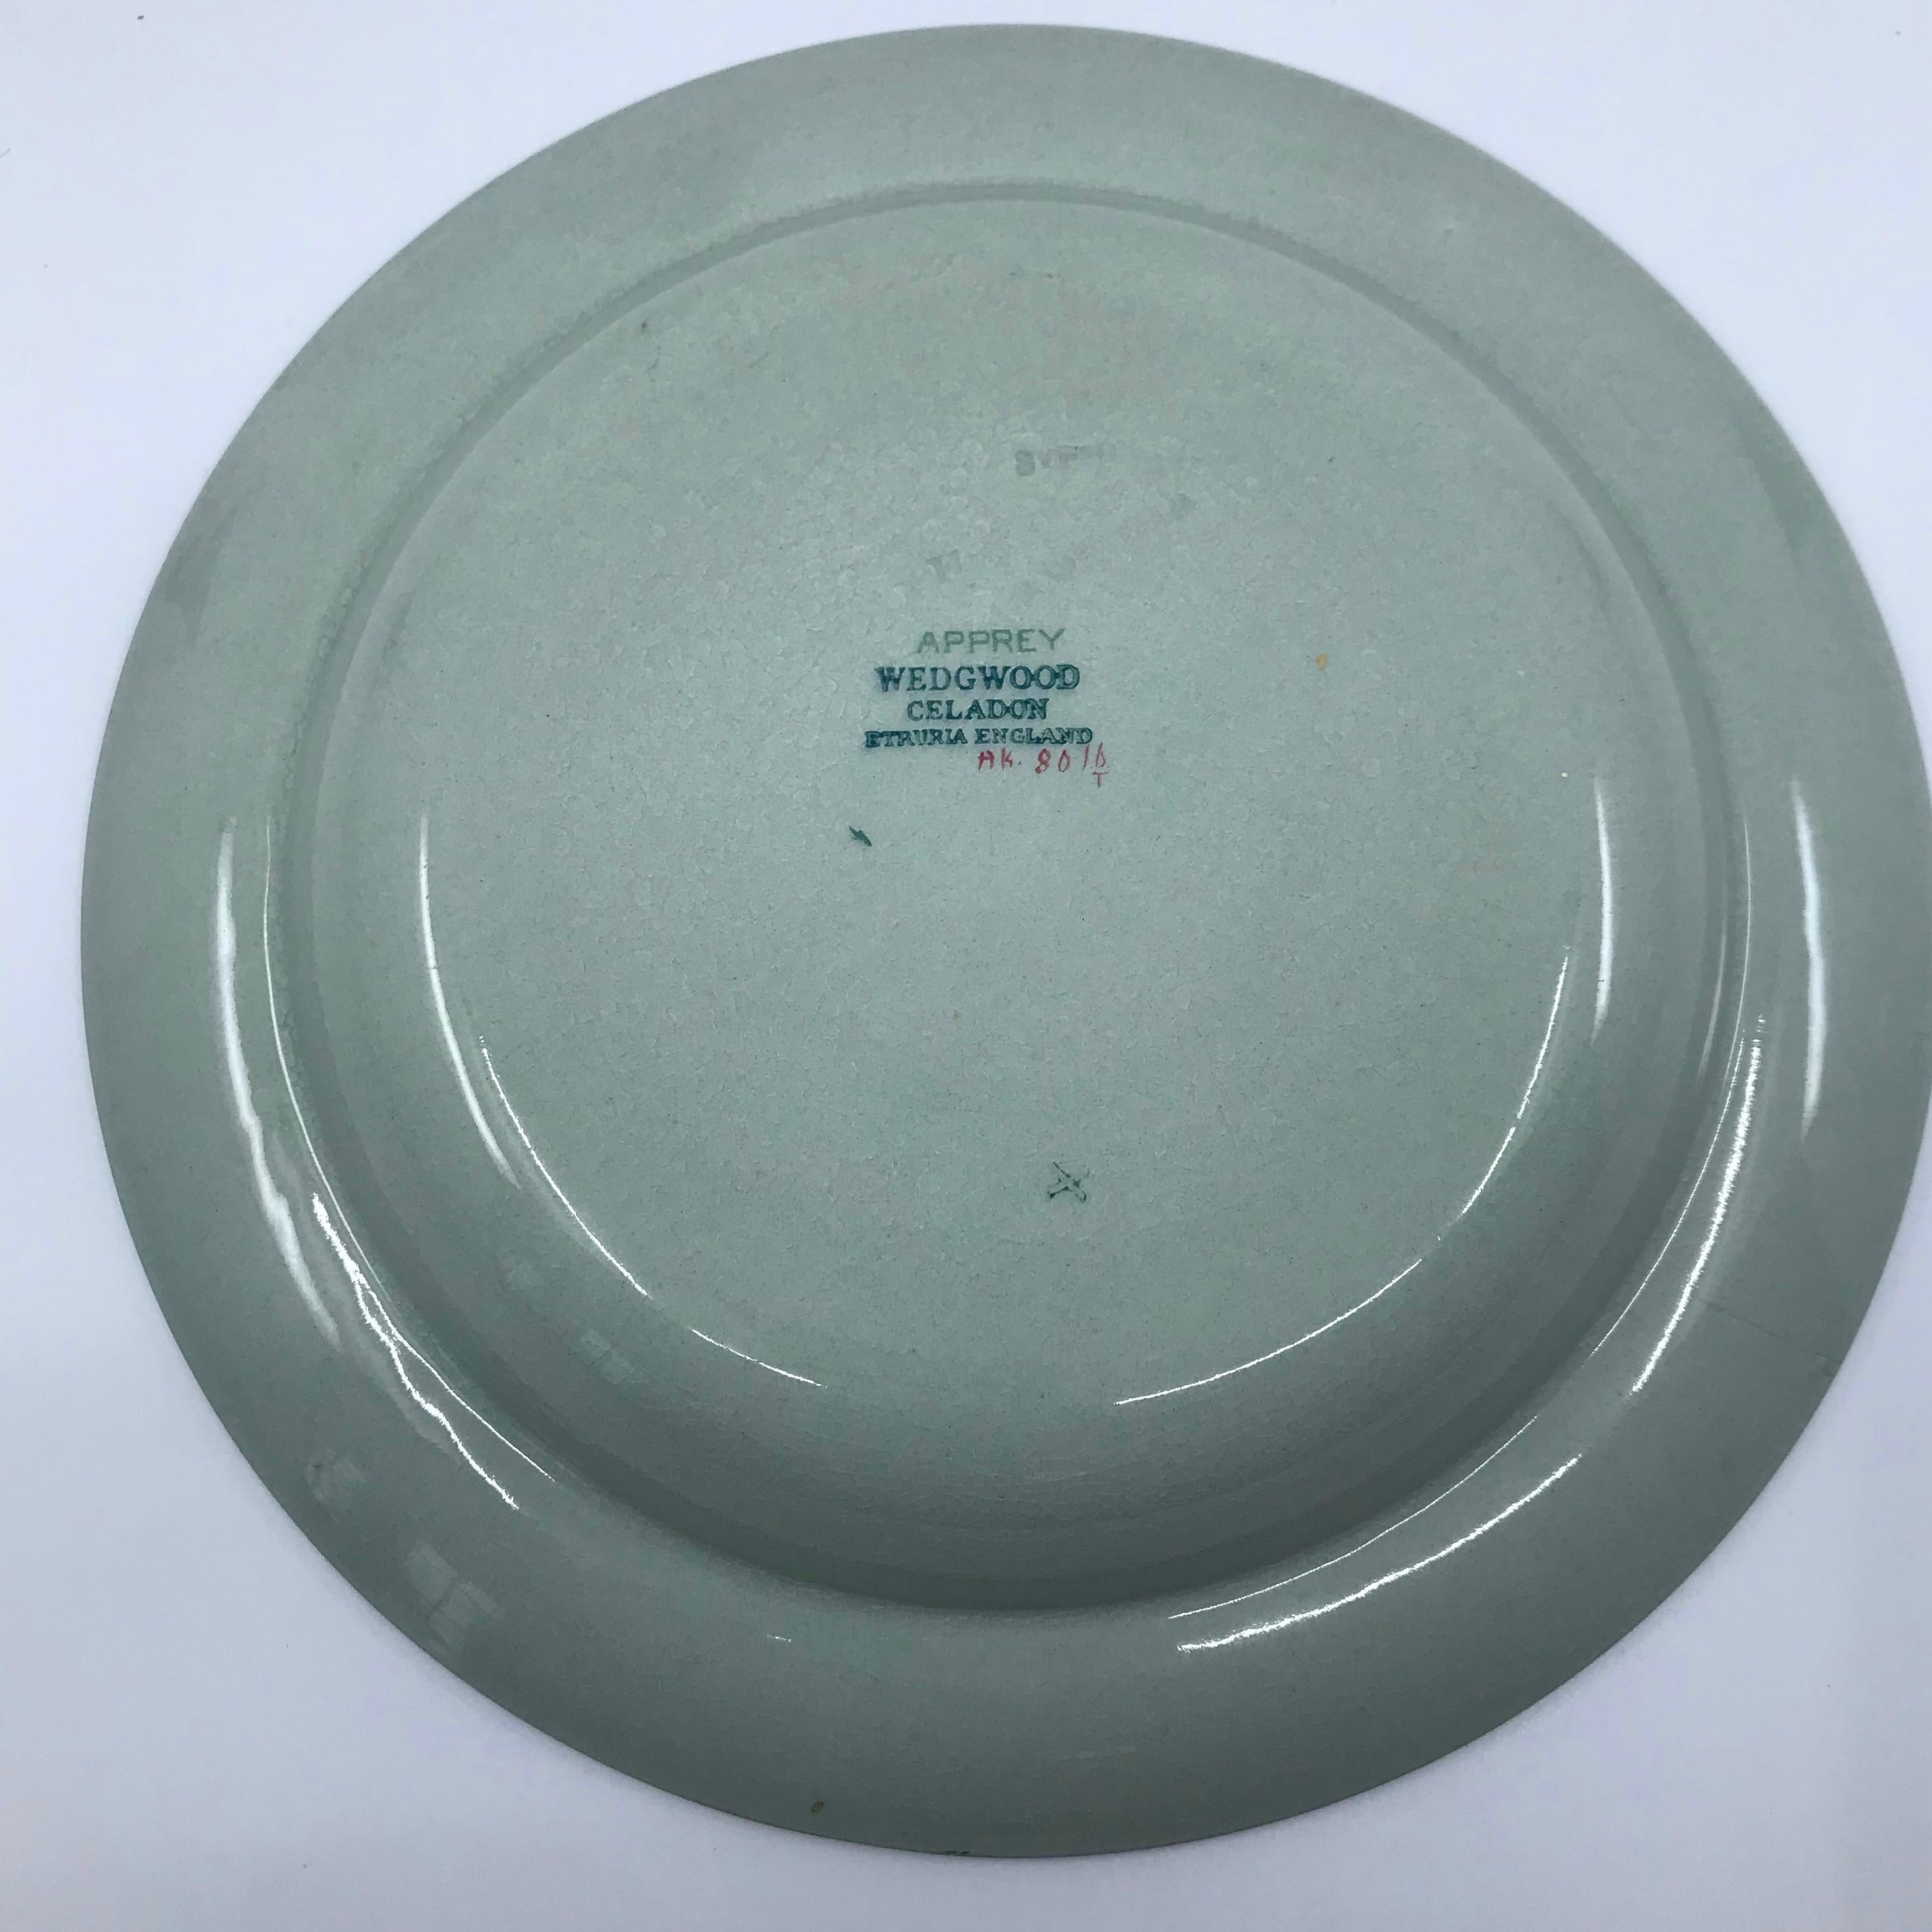 Hand-Painted Wedgwood Apprey Celadon Place-Setting Plates For Sale